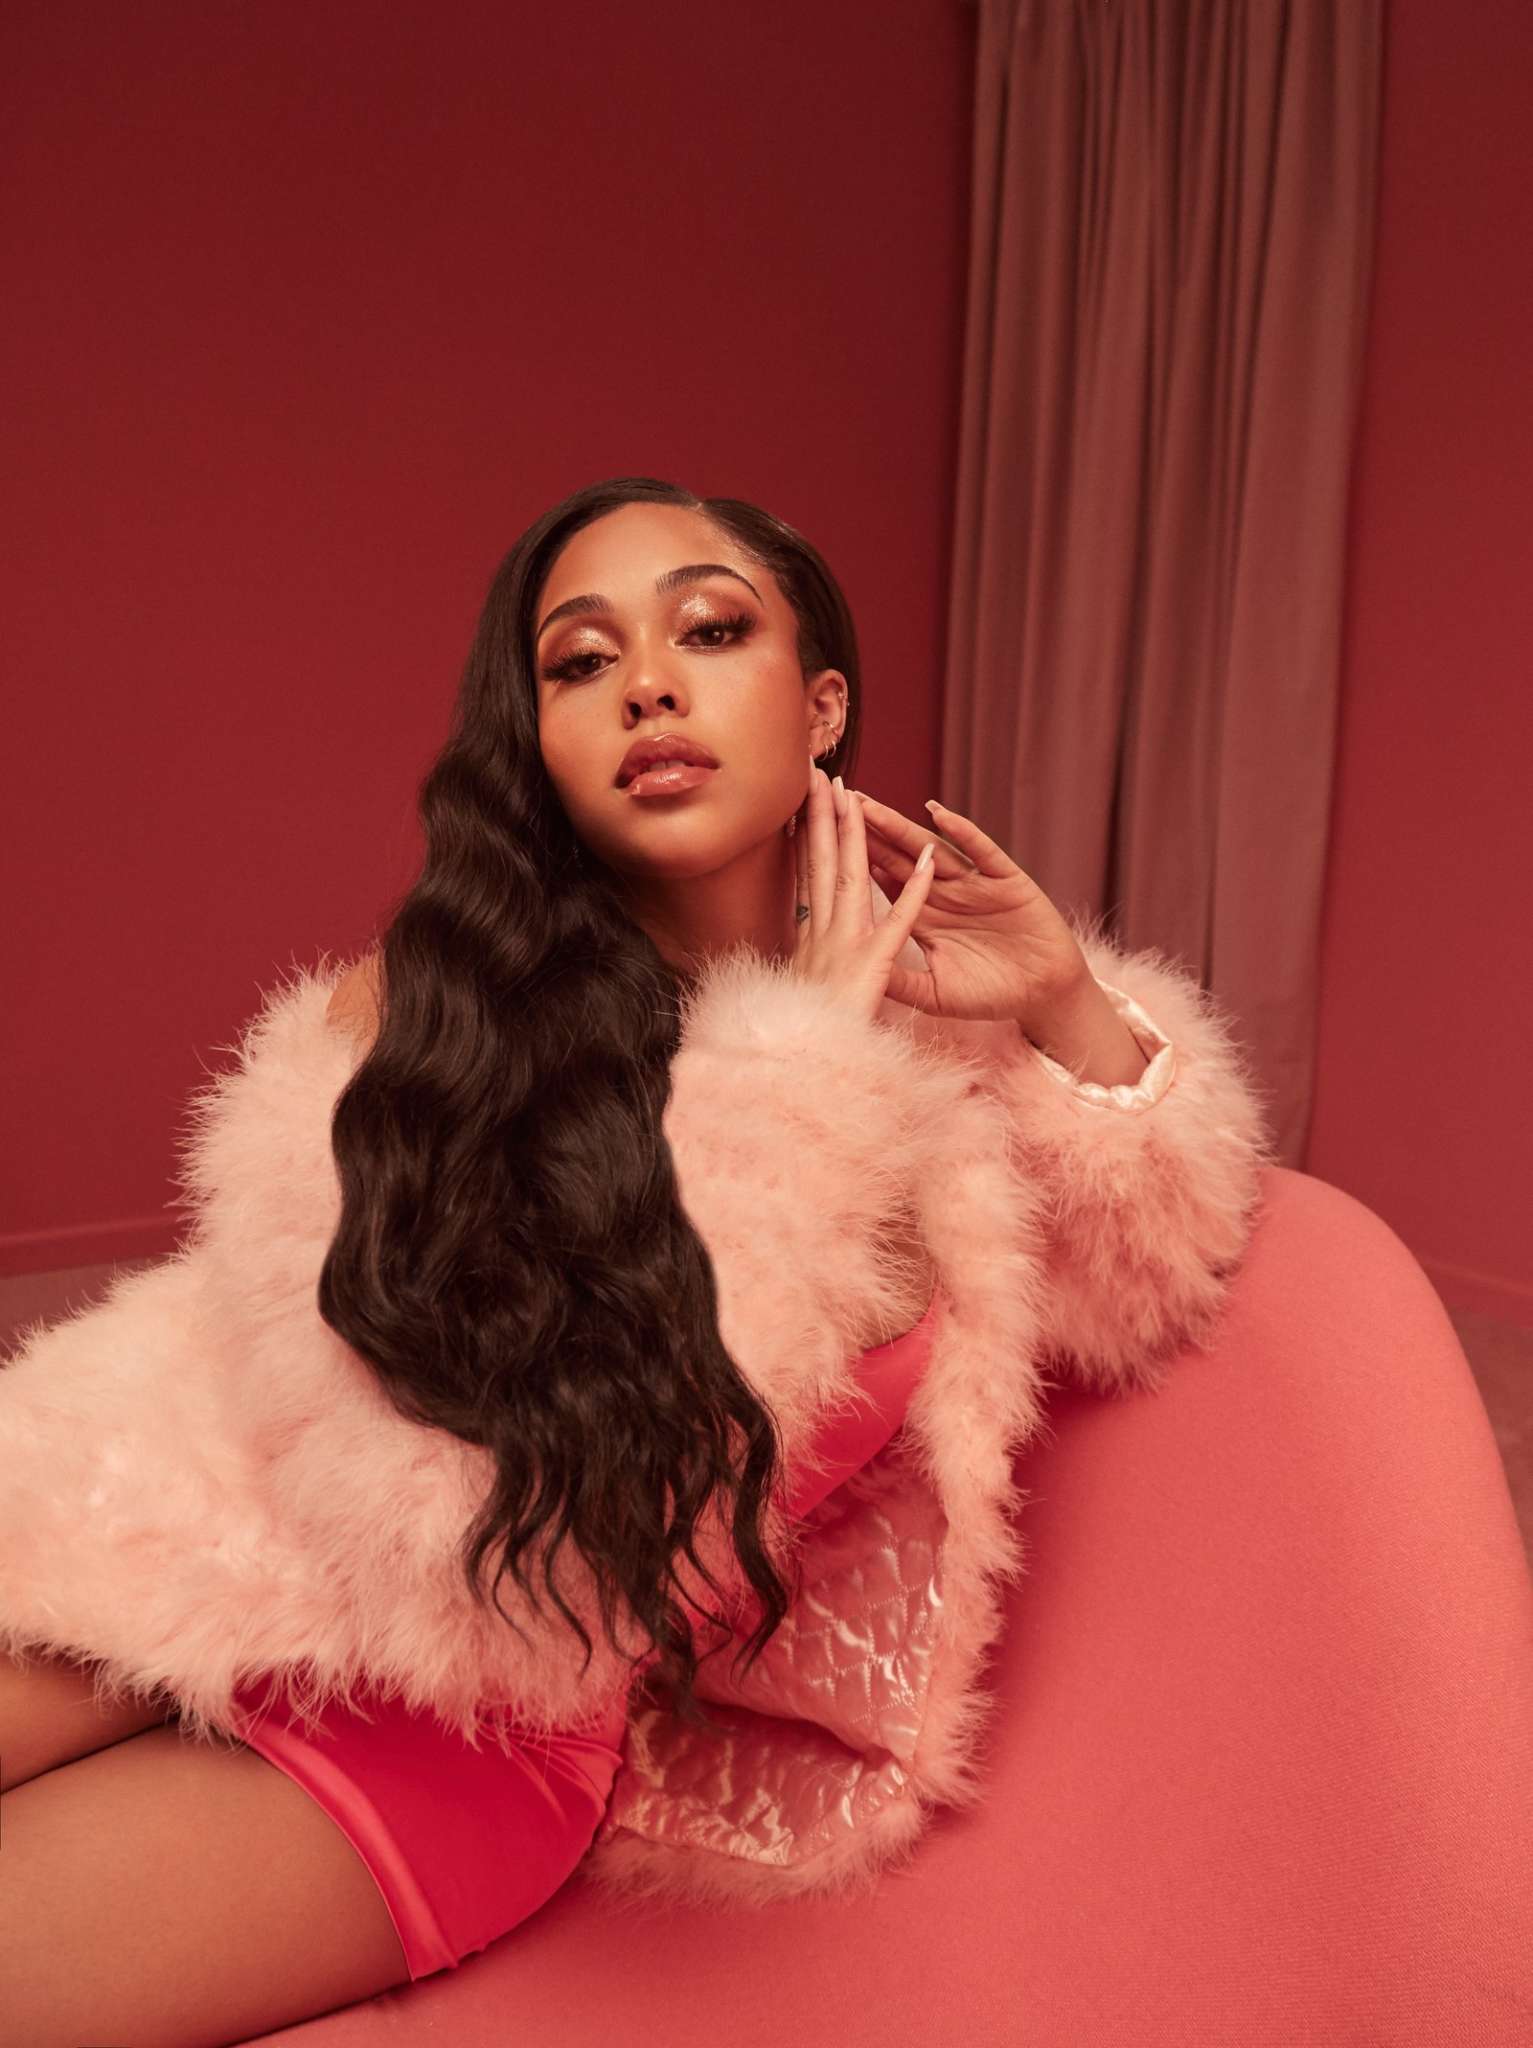 Jordyn Woods' Fans Say That Her Beauty Is Underrated - See Her Latest Photo